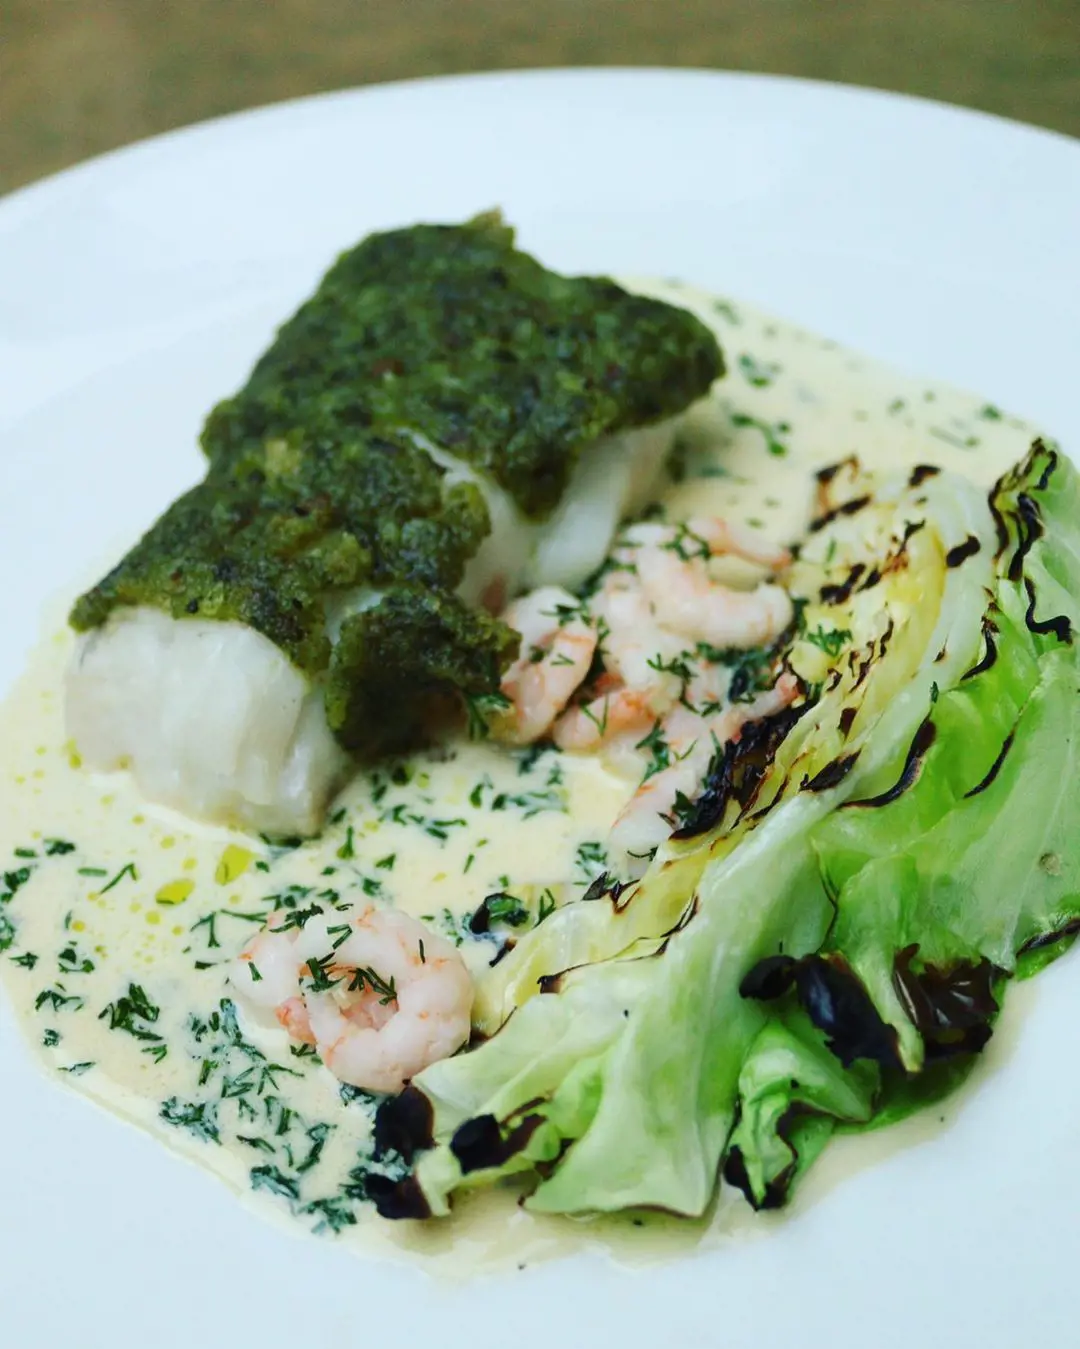 RoastedCrusted Cod with Prawns and Creamed Dill Sauce